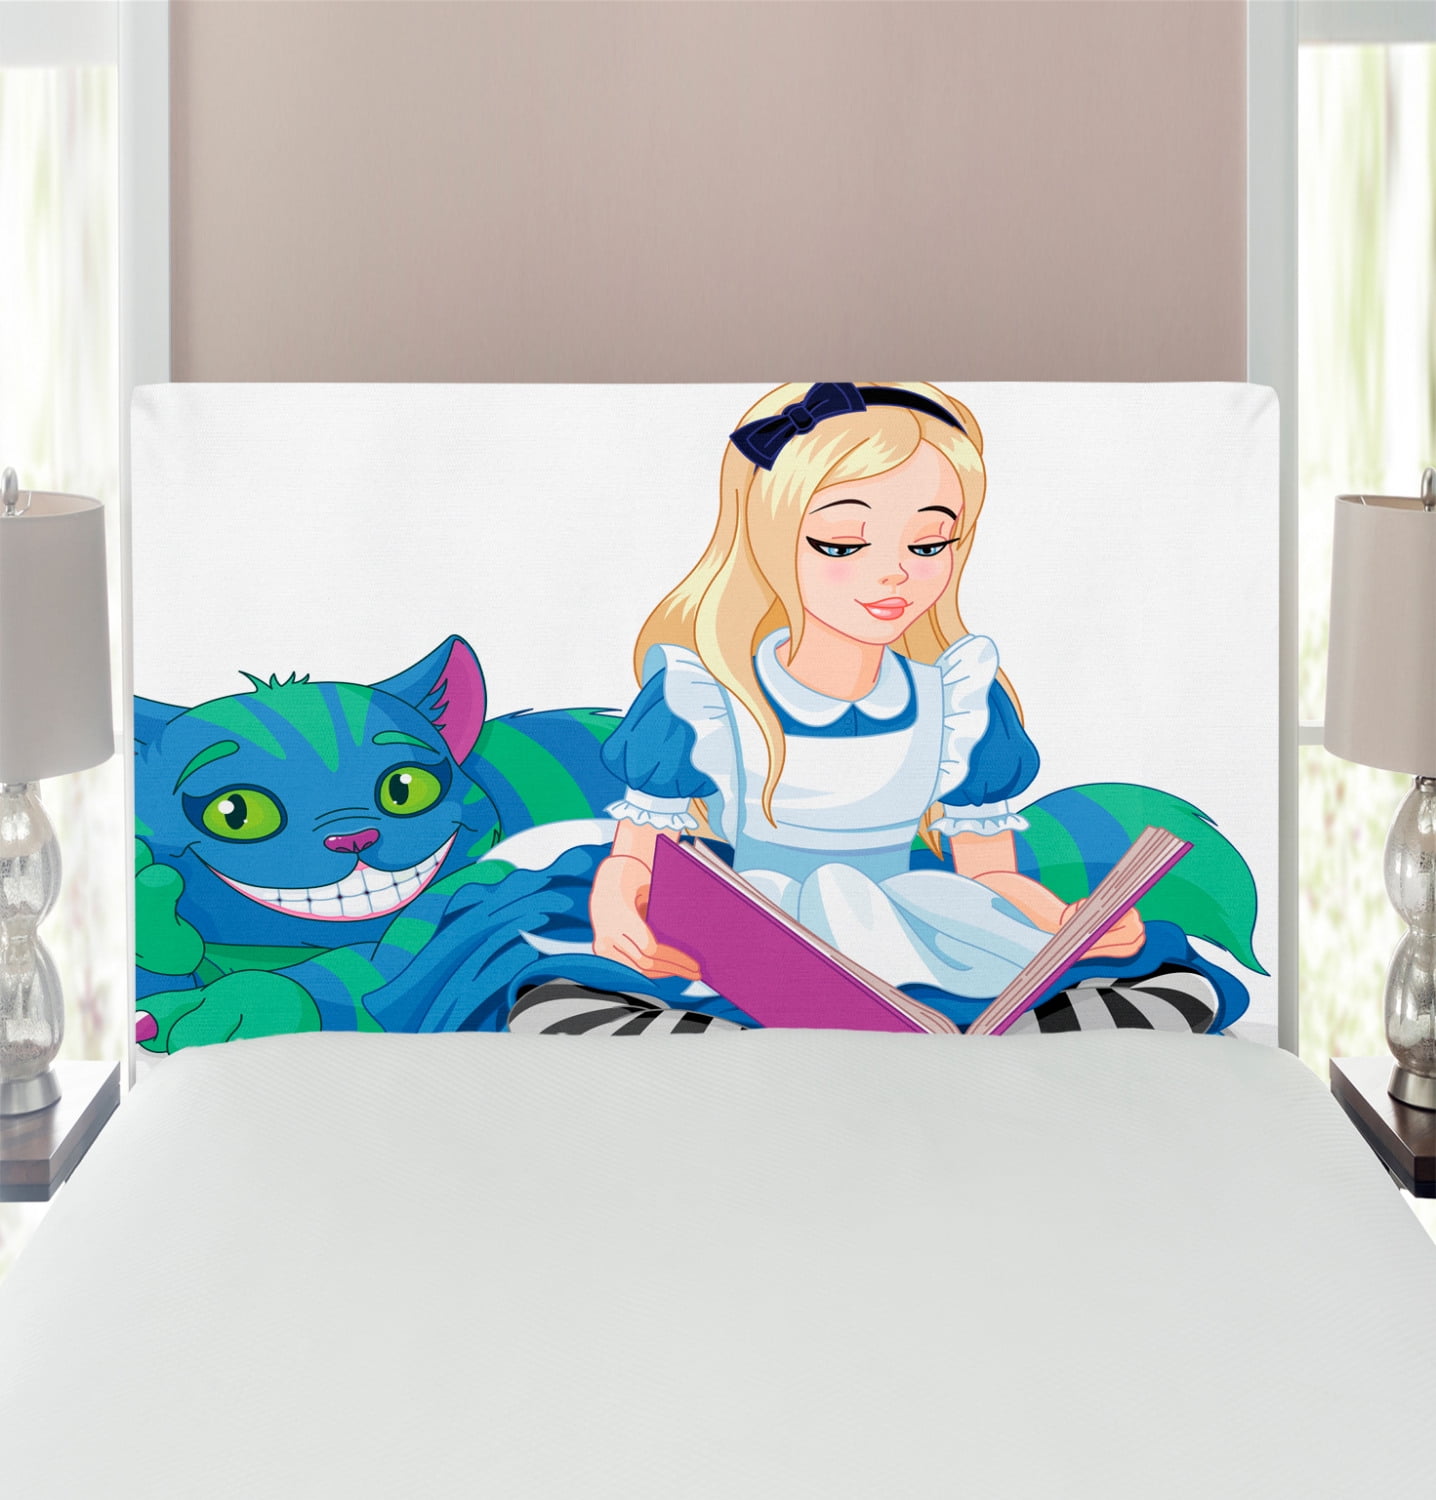 Authenticatie Toestemming zoeken Alice in Wonderland Headboard, Alice Reading Book Cat Colorful World  Happiness Love Character Image, Upholstered Decorative Metal Bed Headboard  with Memory Foam, Twin Size, Multicolor, by Ambesonne - Walmart.com